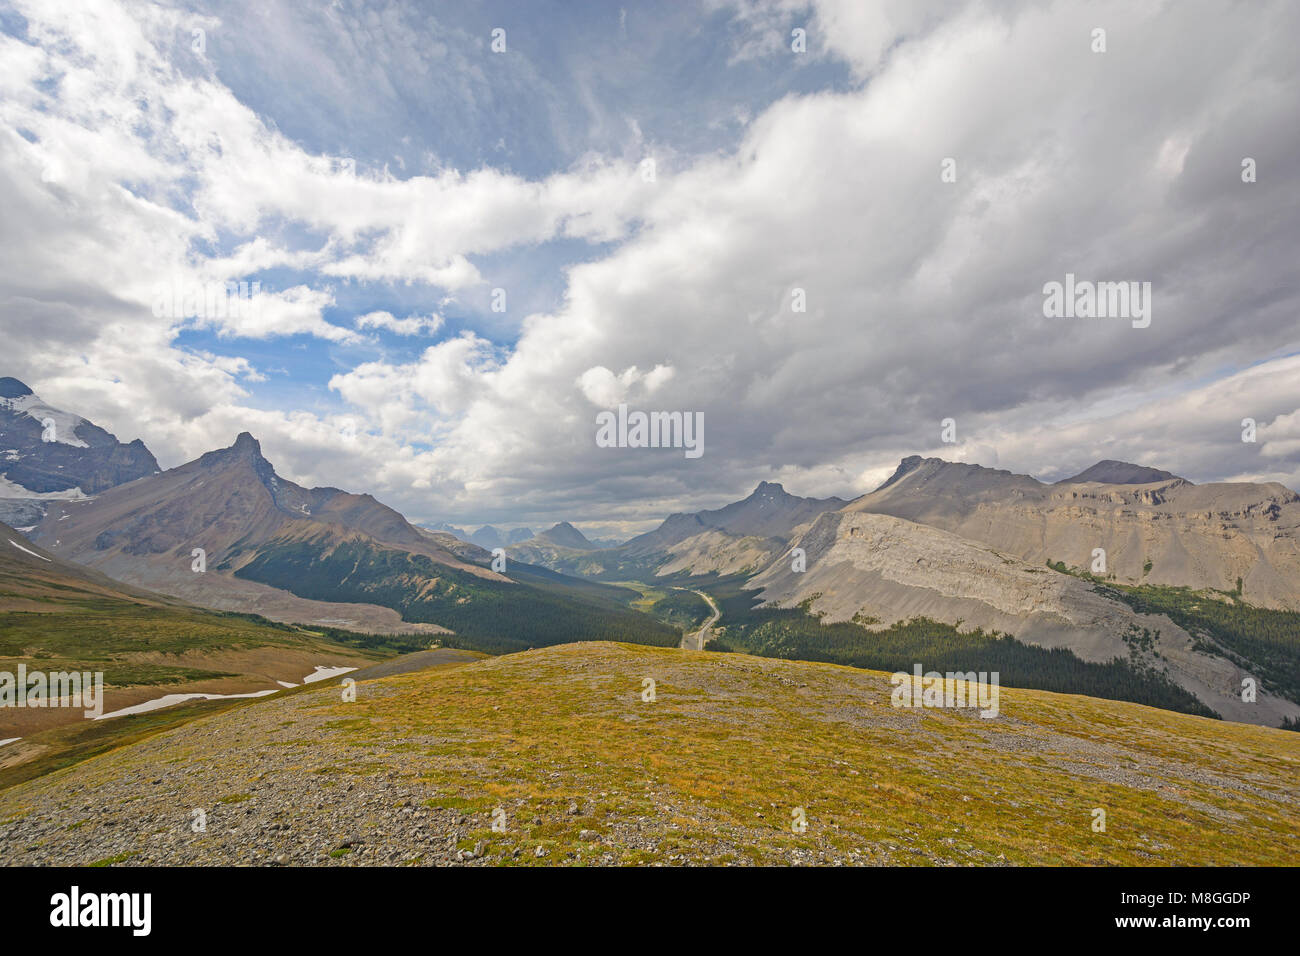 Sun and Clouds above the Alpine Tundra of the Canadian Rockies in Jasper National Park in Alberta, Canada Stock Photo